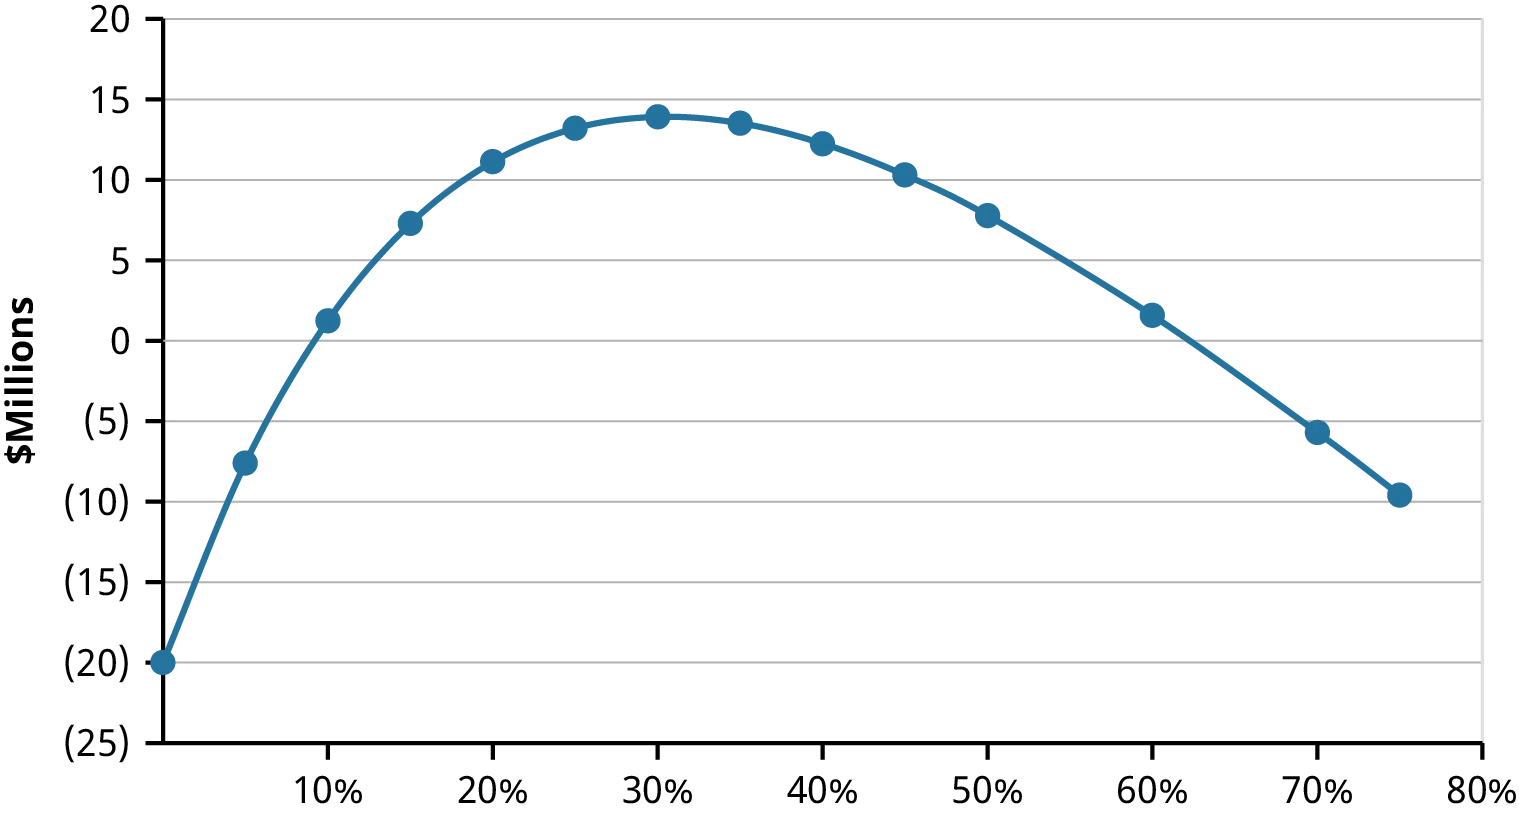 Net present value graph for a project with two IRRs. It shows that the NPV is negative at low-interest rates, and becomes positive at higher interest rates. The NPV then turns negative again as the interest rate continues to rise. Because the NPV profile line crosses the horizontal axis twice, there are two IRRs.